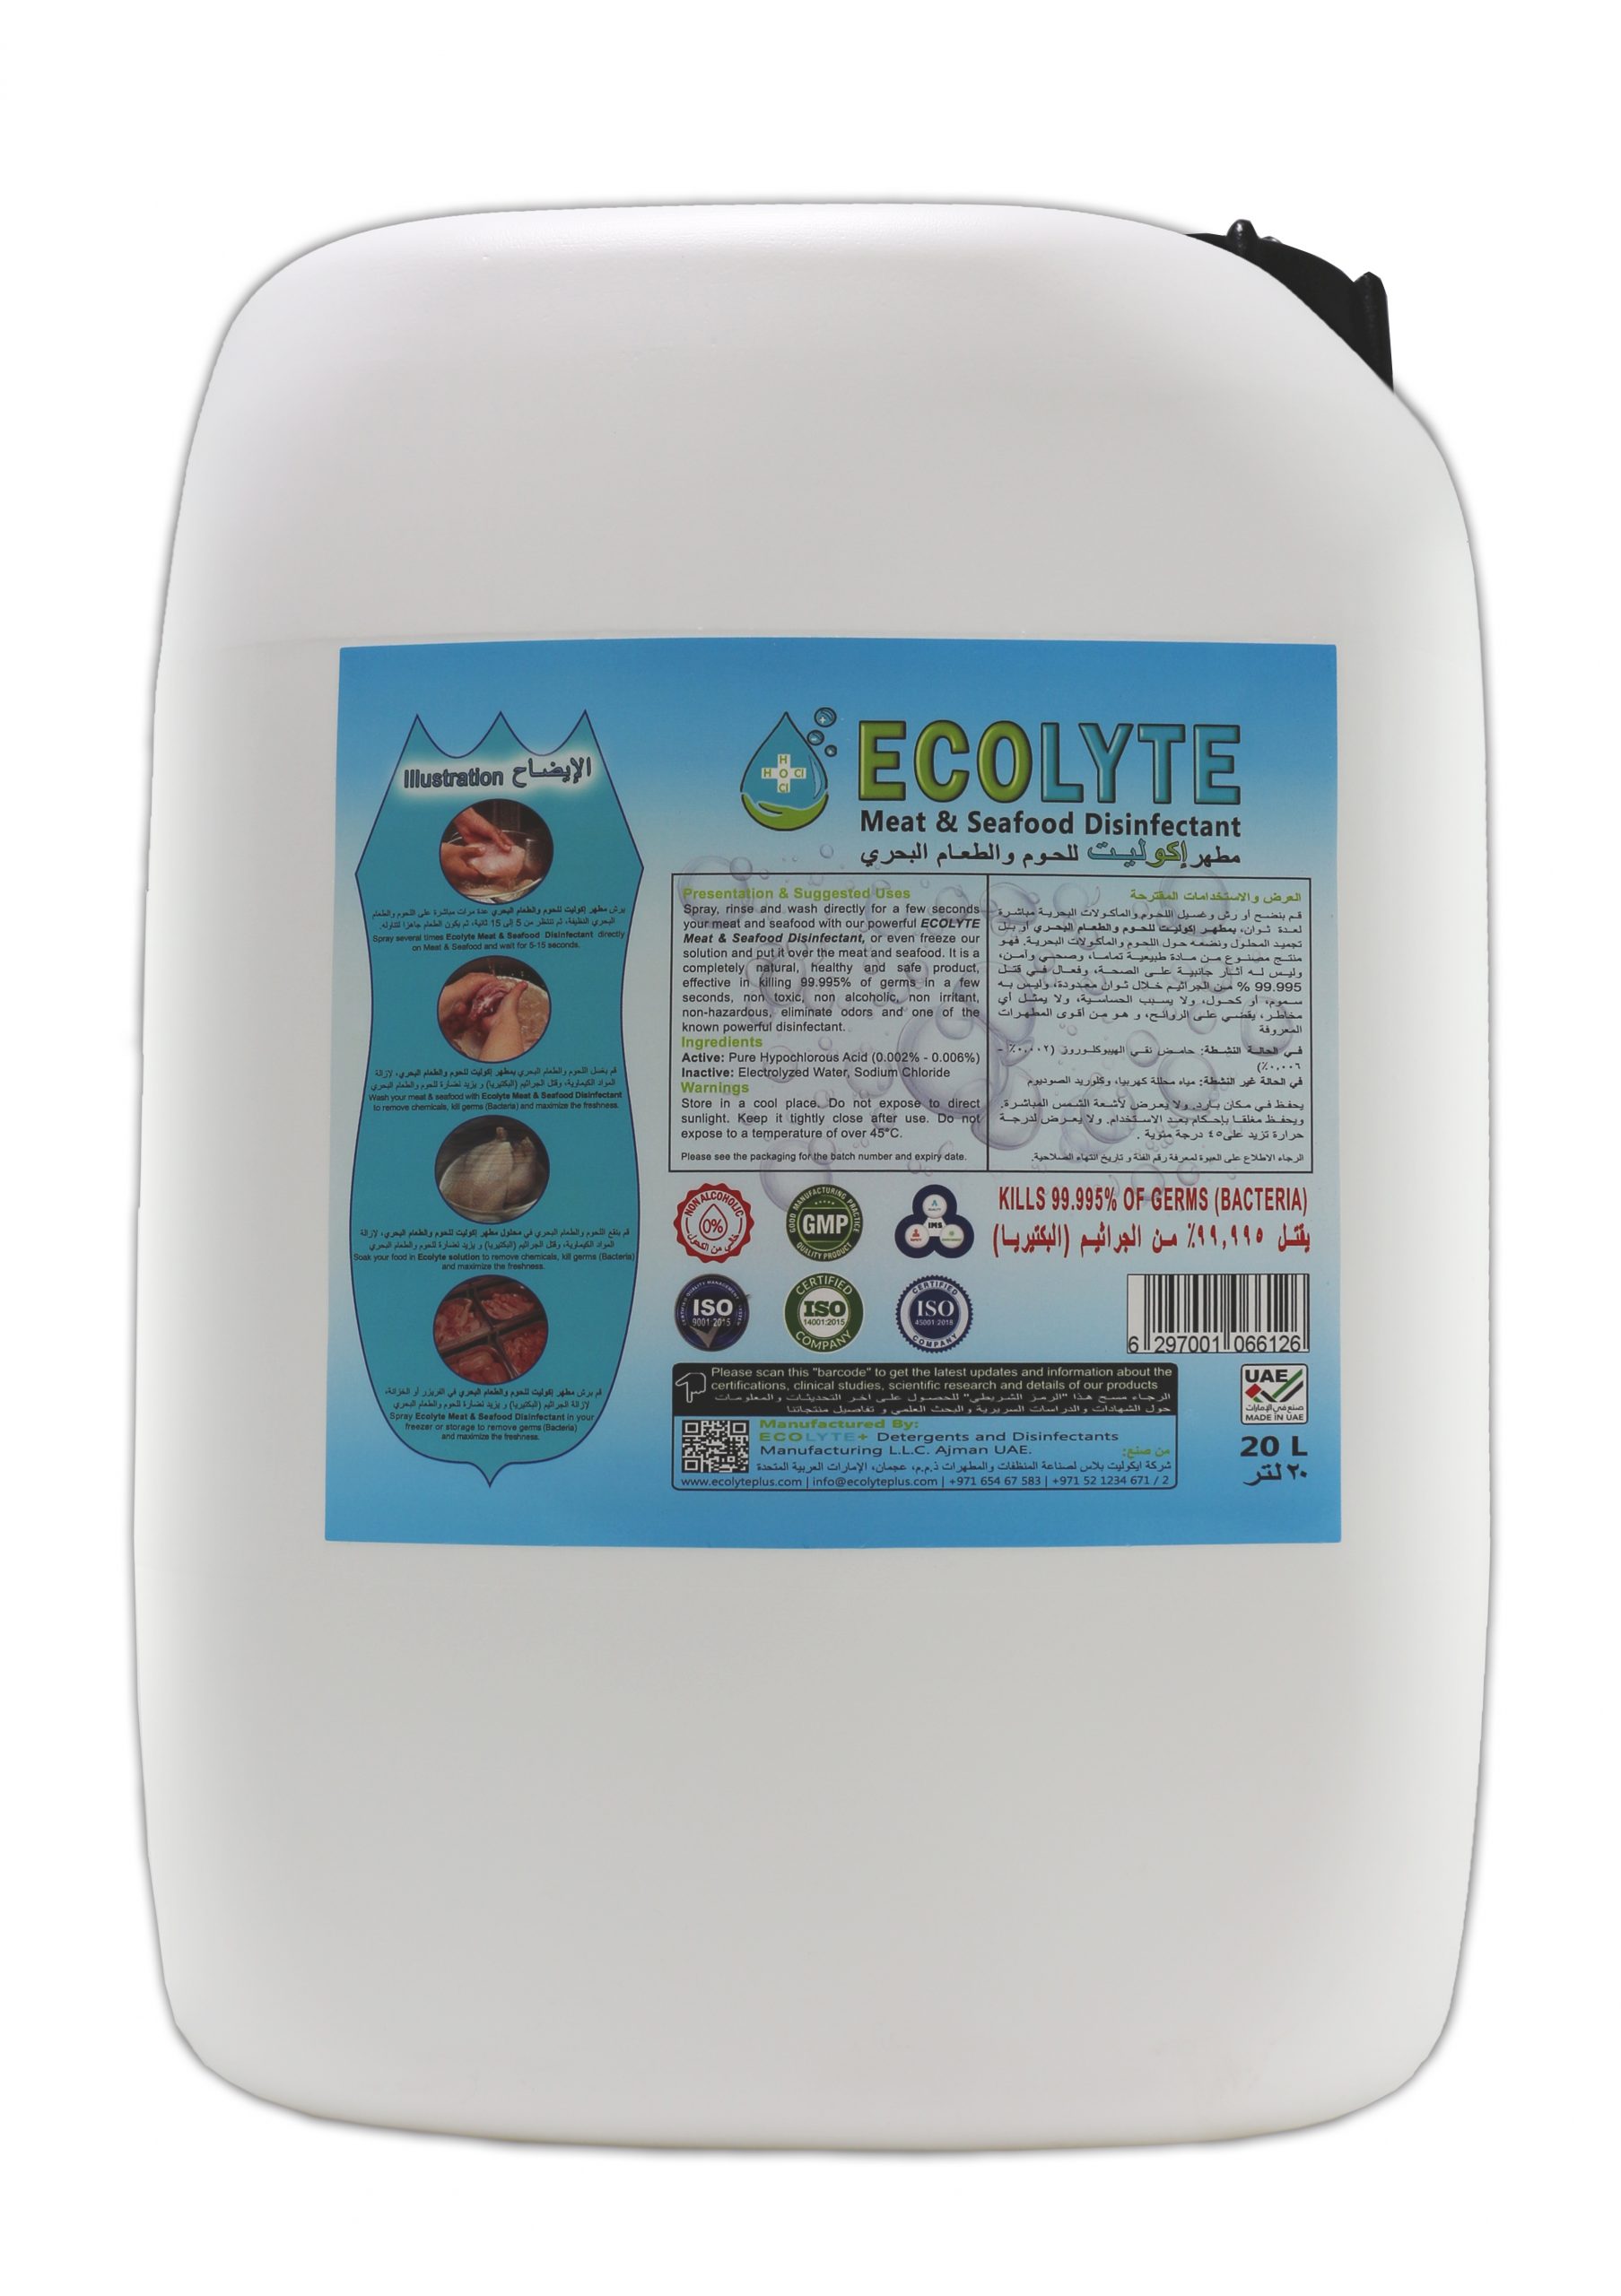 Ecolyte Meat & Seafood Disinfectant 100% Natural - 20 Litre